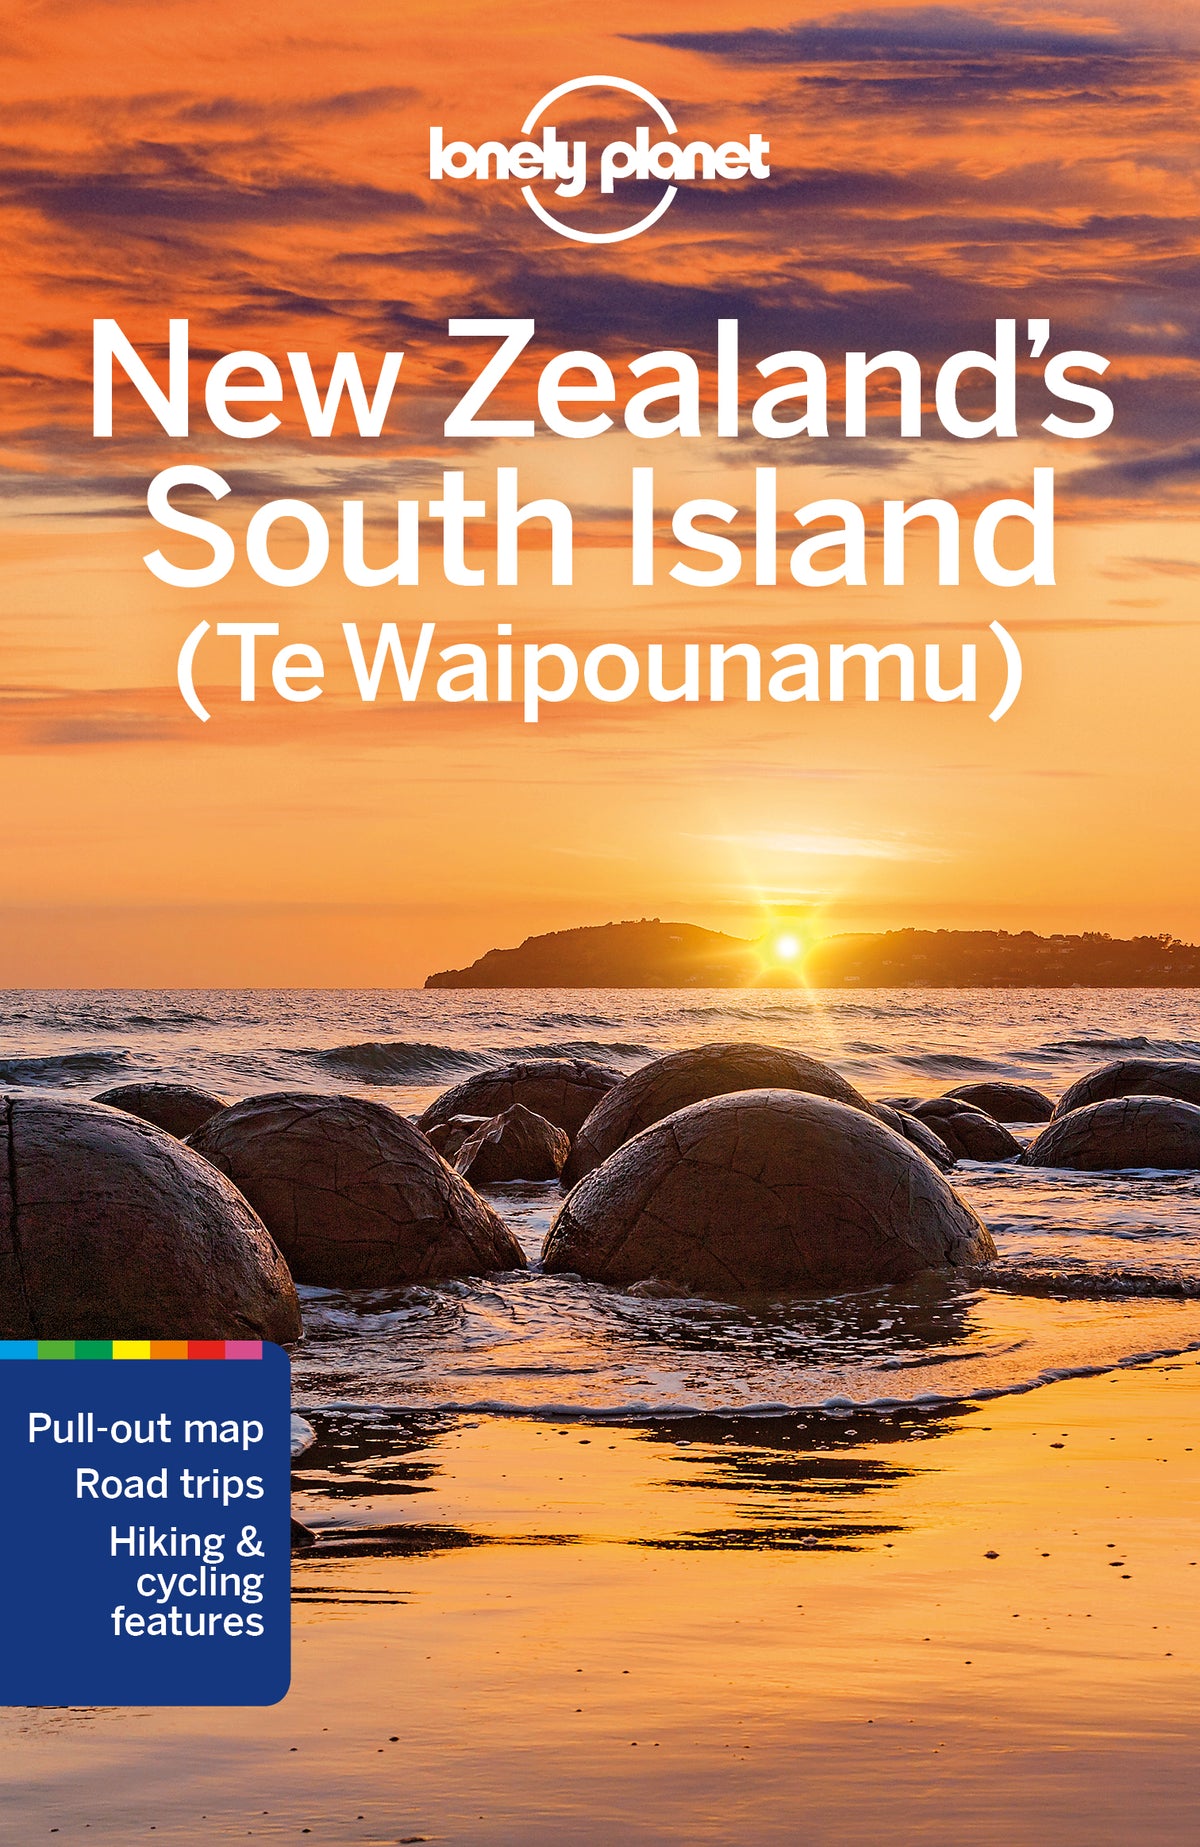 New Zealand's South Island Travel Guide